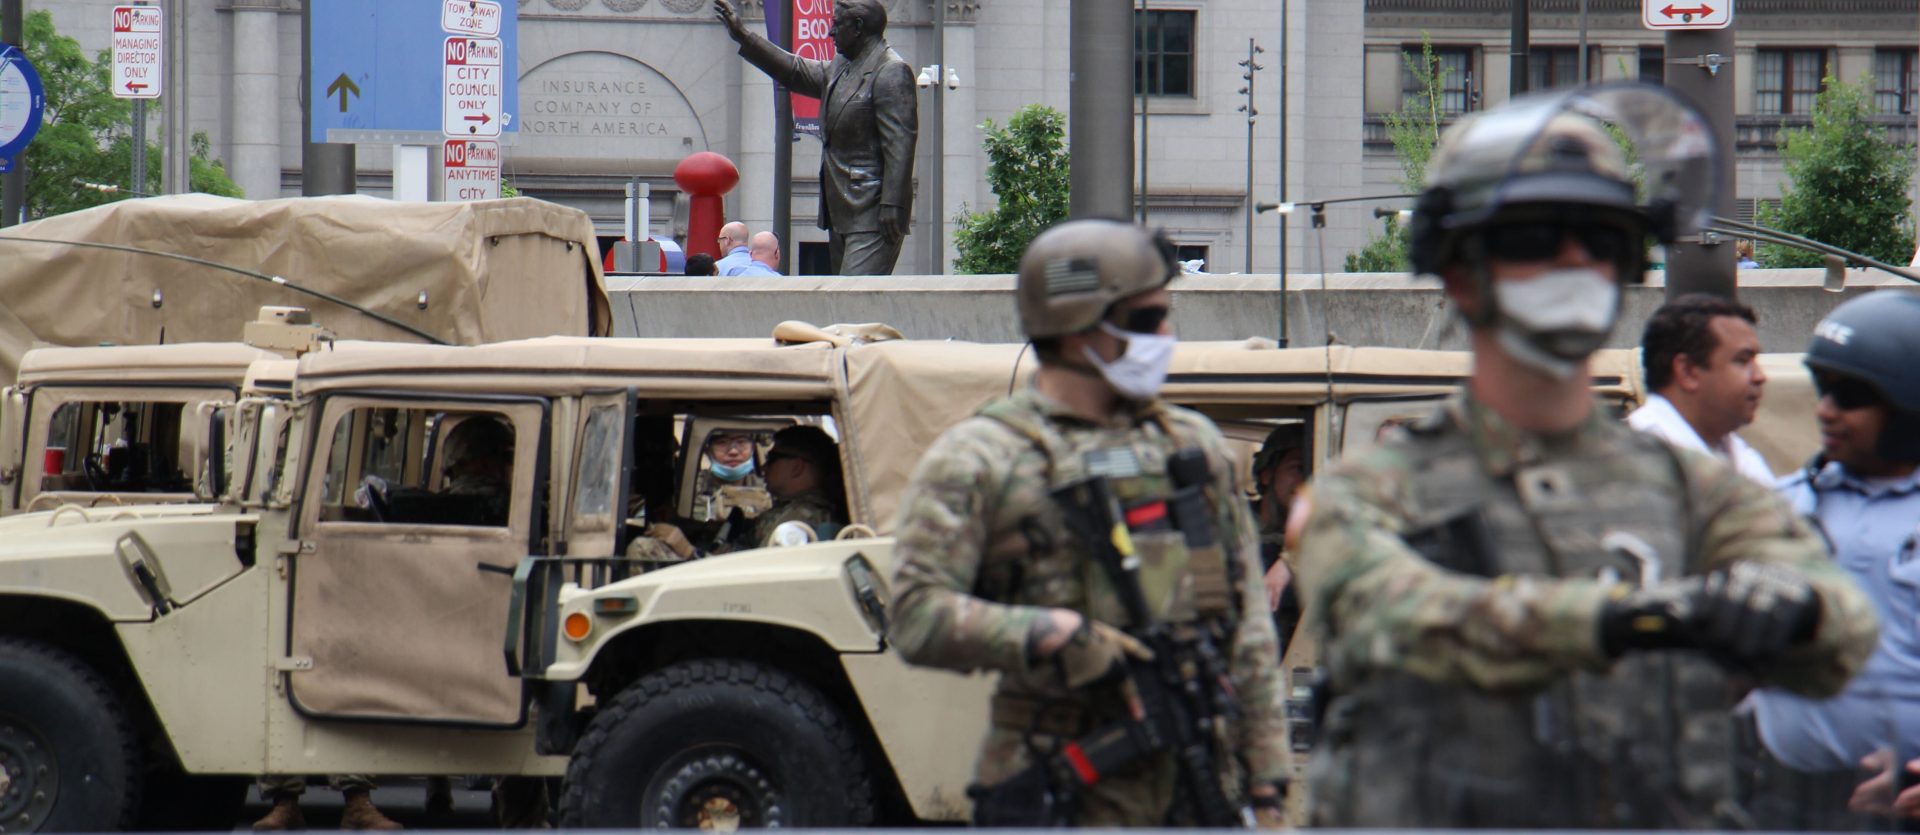 The National Guard protects the Frank Rizzo statue in Philadelphia.